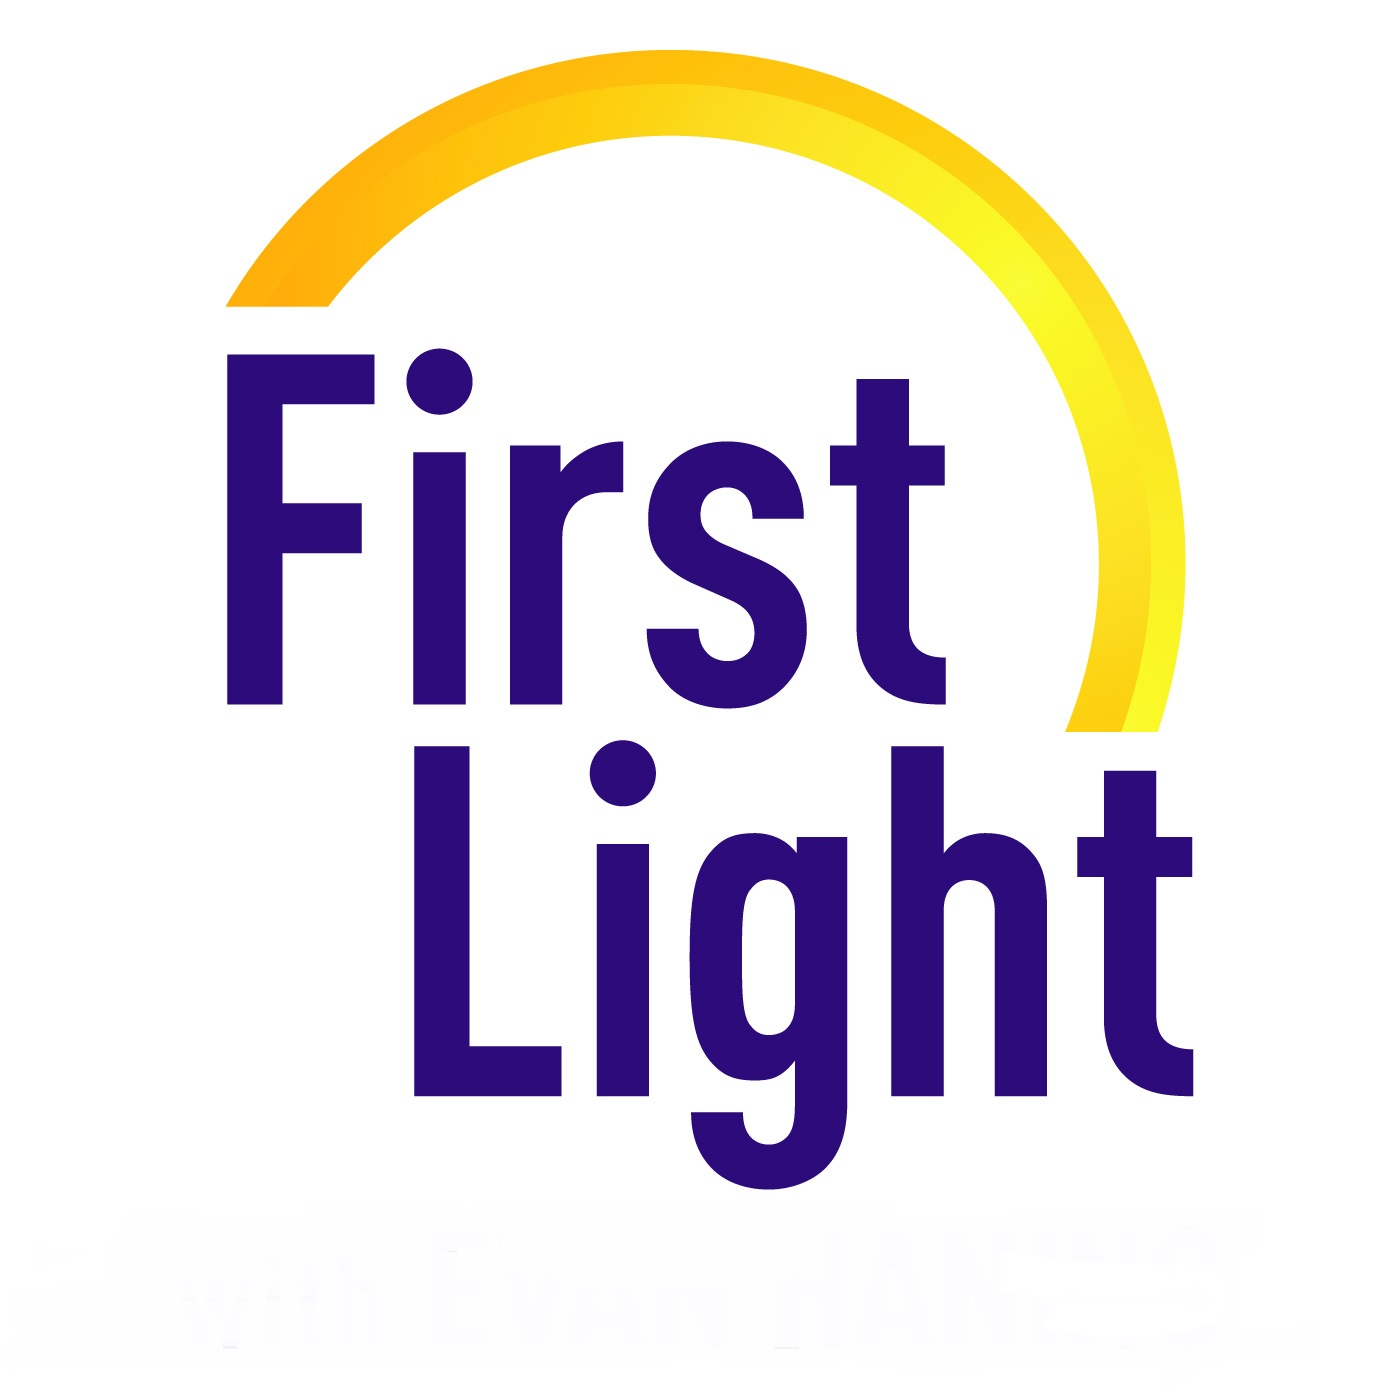 First Light - Tuesday, February 9, 2021